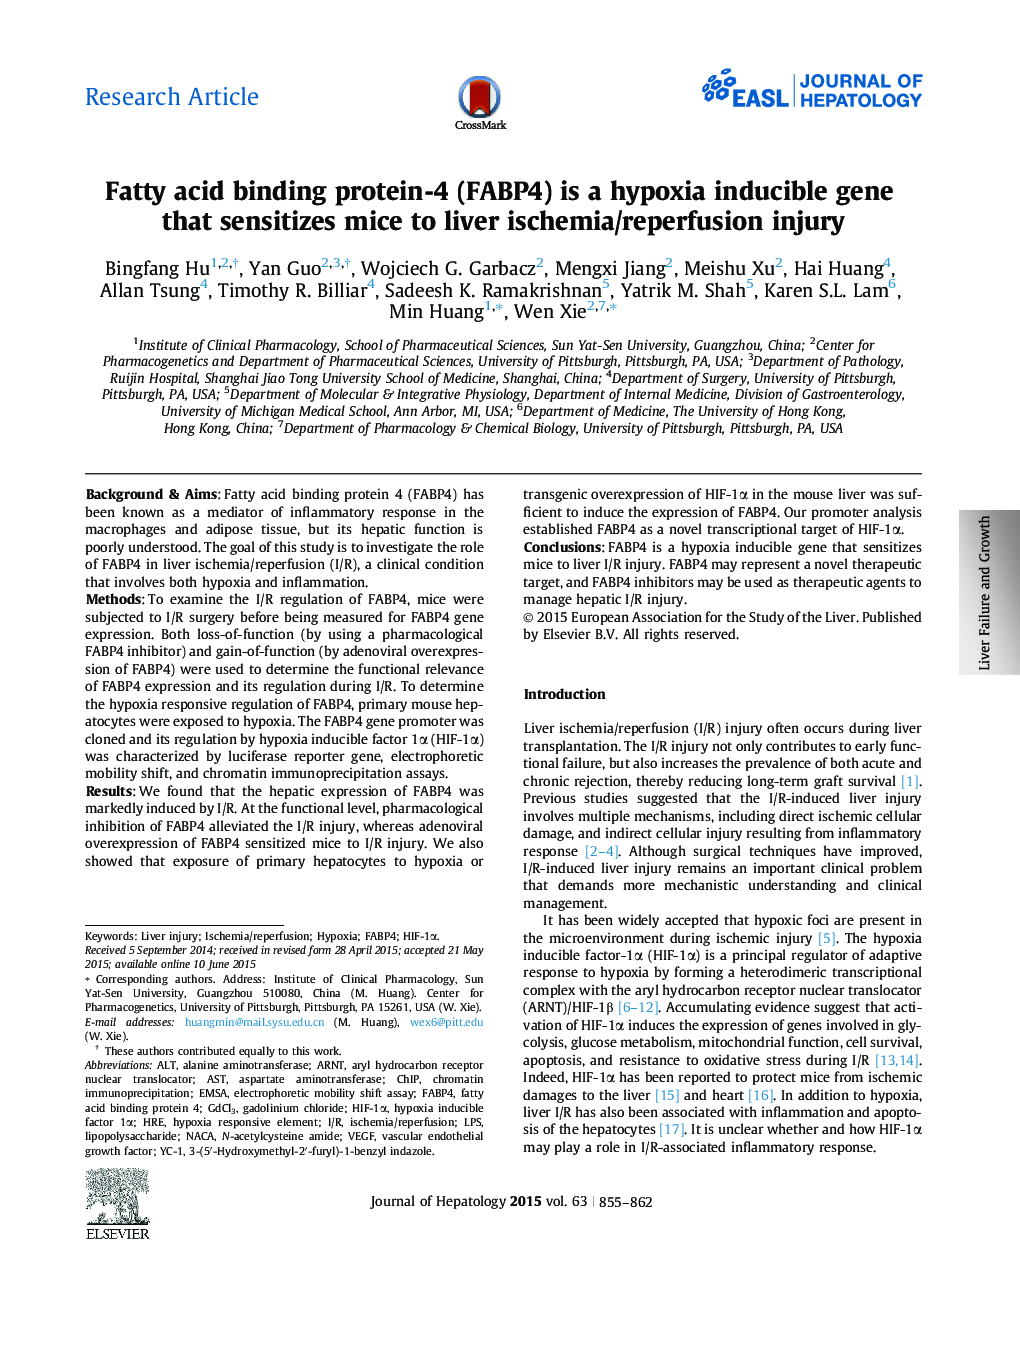 Research ArticleFatty acid binding protein-4 (FABP4) is a hypoxia inducible gene that sensitizes mice to liver ischemia/reperfusion injury